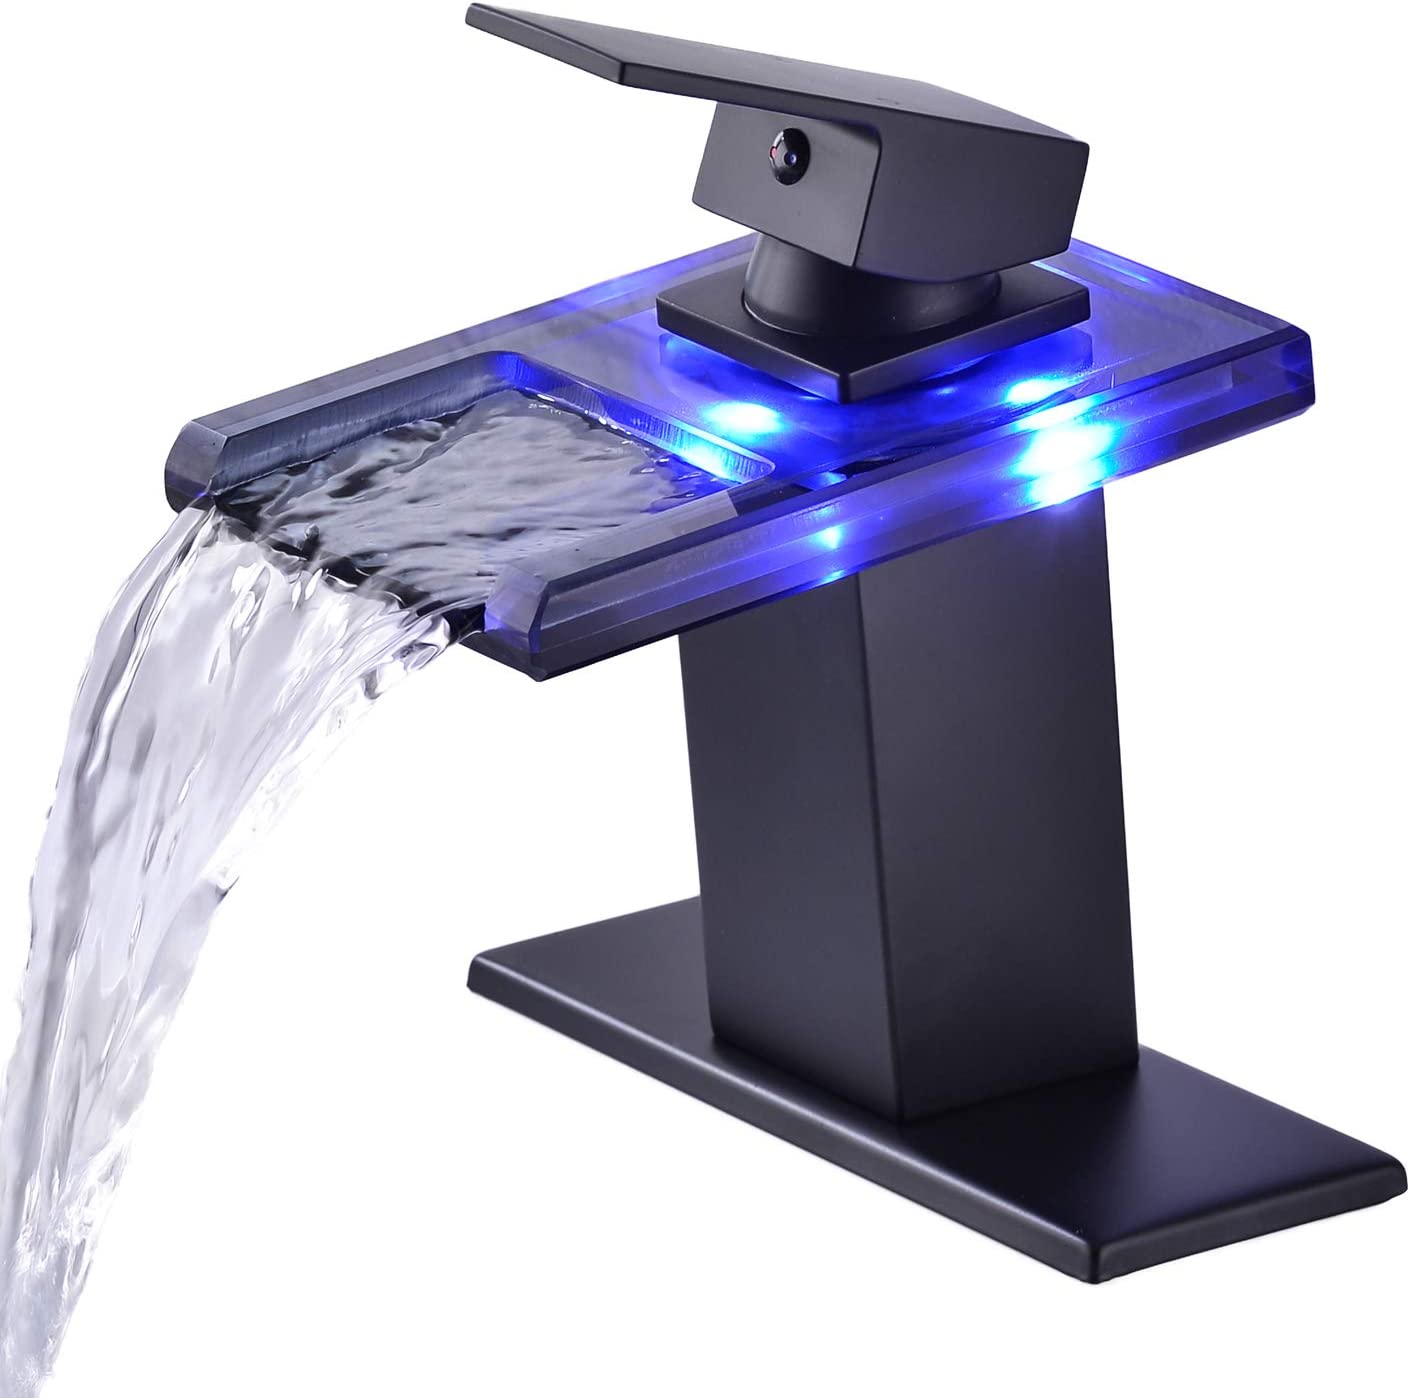 US LED Waterfall Glass Spout Bathroom Basin Sink Mixer Faucet 1 Handle Brass Tap 